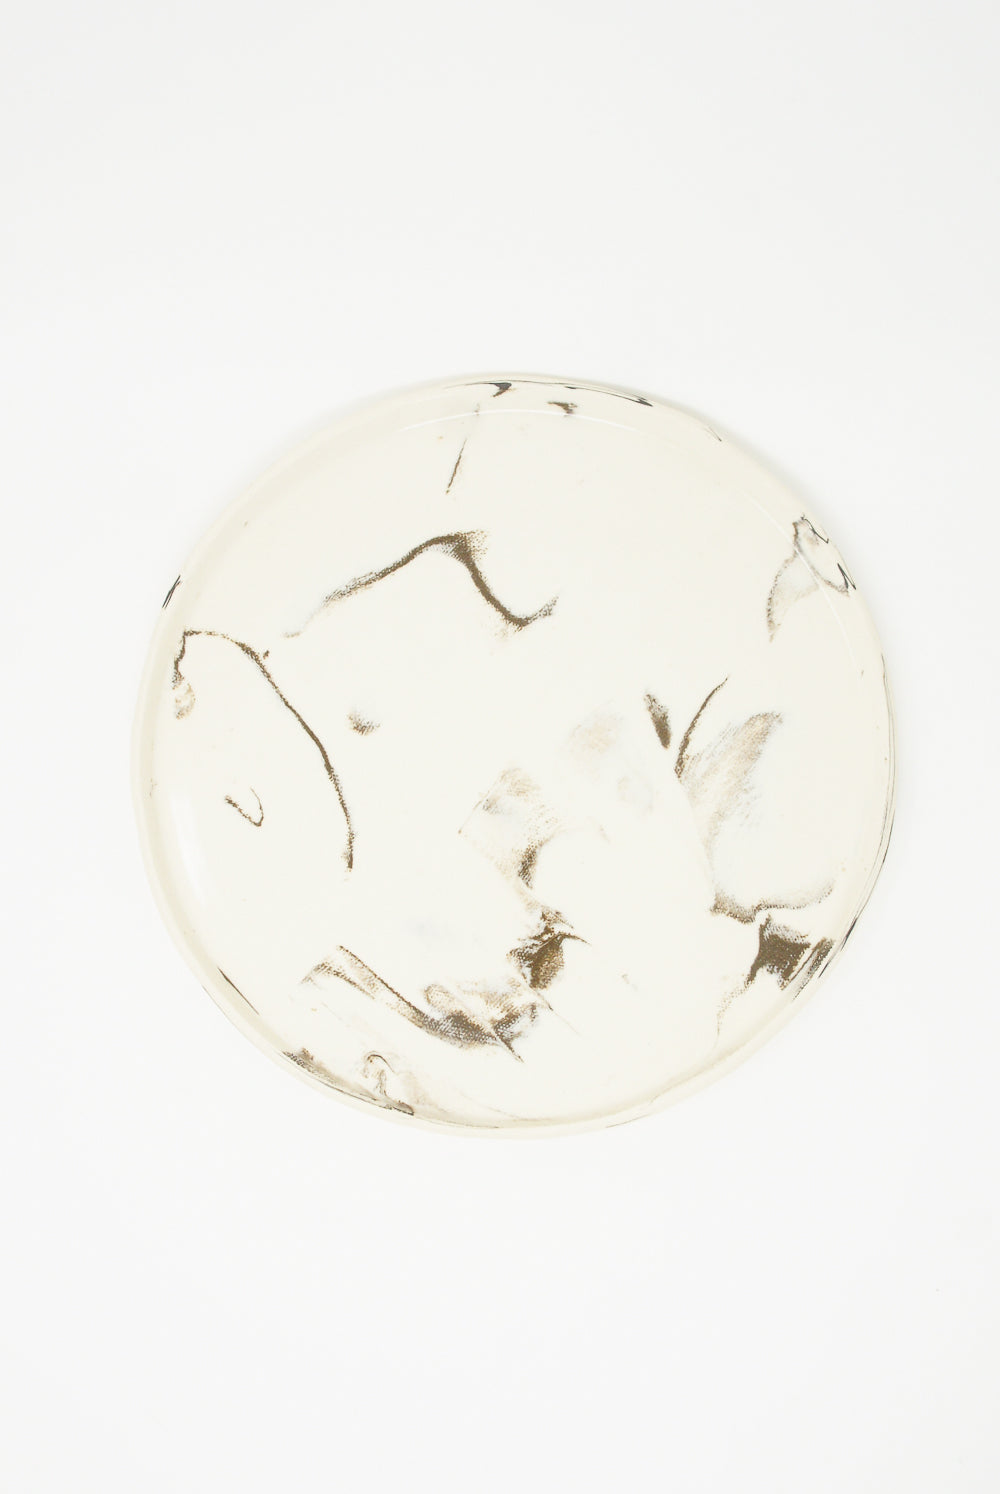 Lost Quarry Marbled Fields Platter in Mixed Marbled Clay - White/Black top view